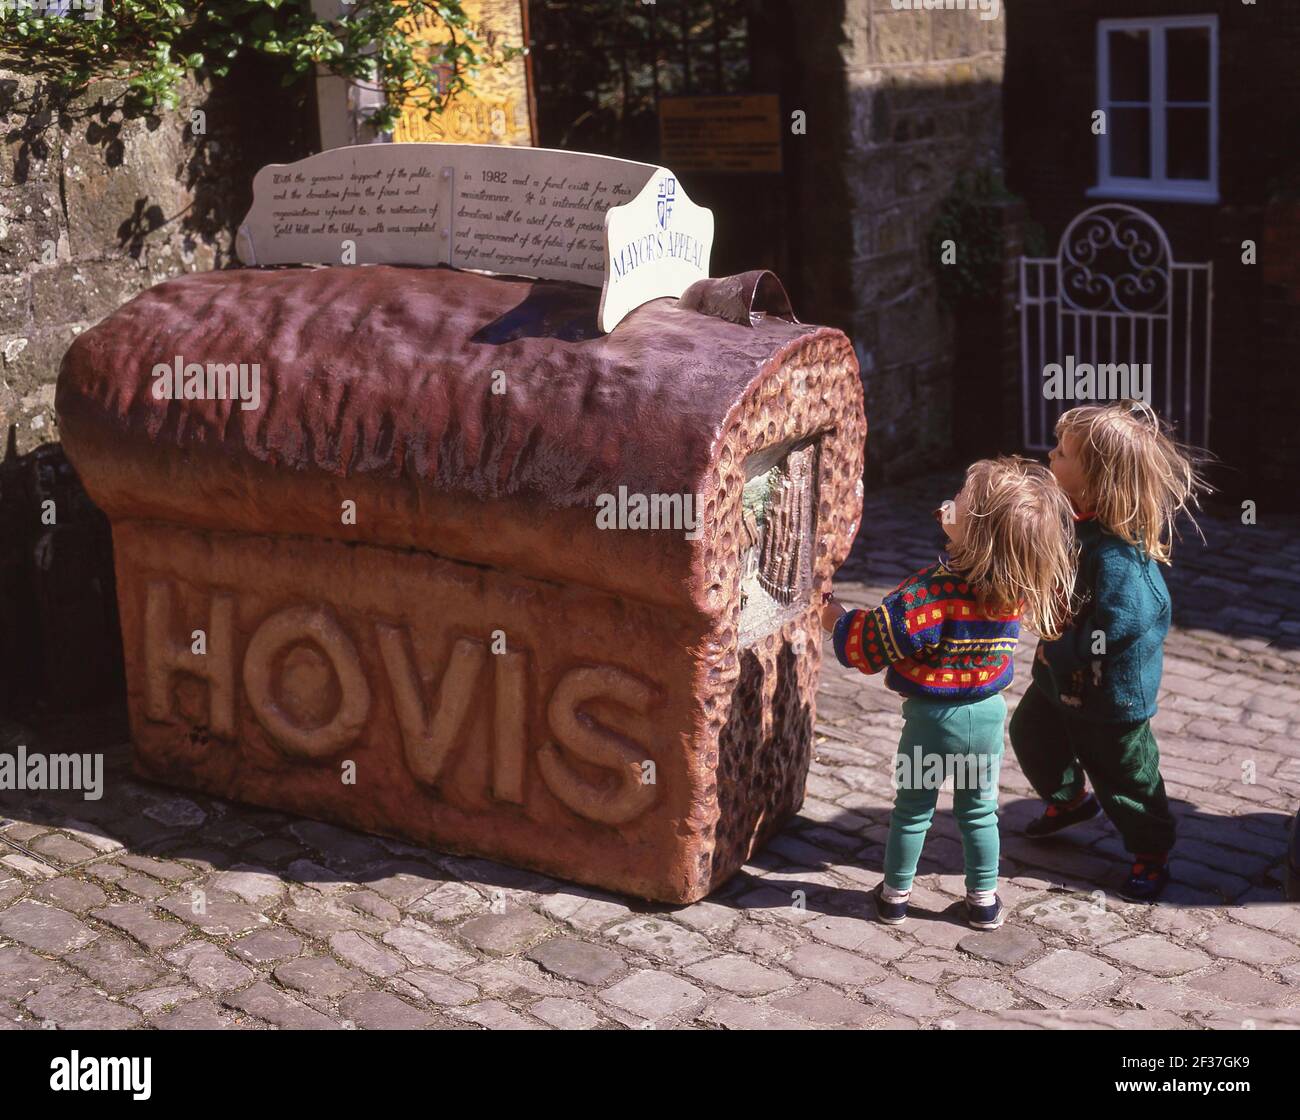 Children by money appeal Hovis loaf, Gold Hill, Shaftesbury, Dorset, England, United Kingdom Stock Photo